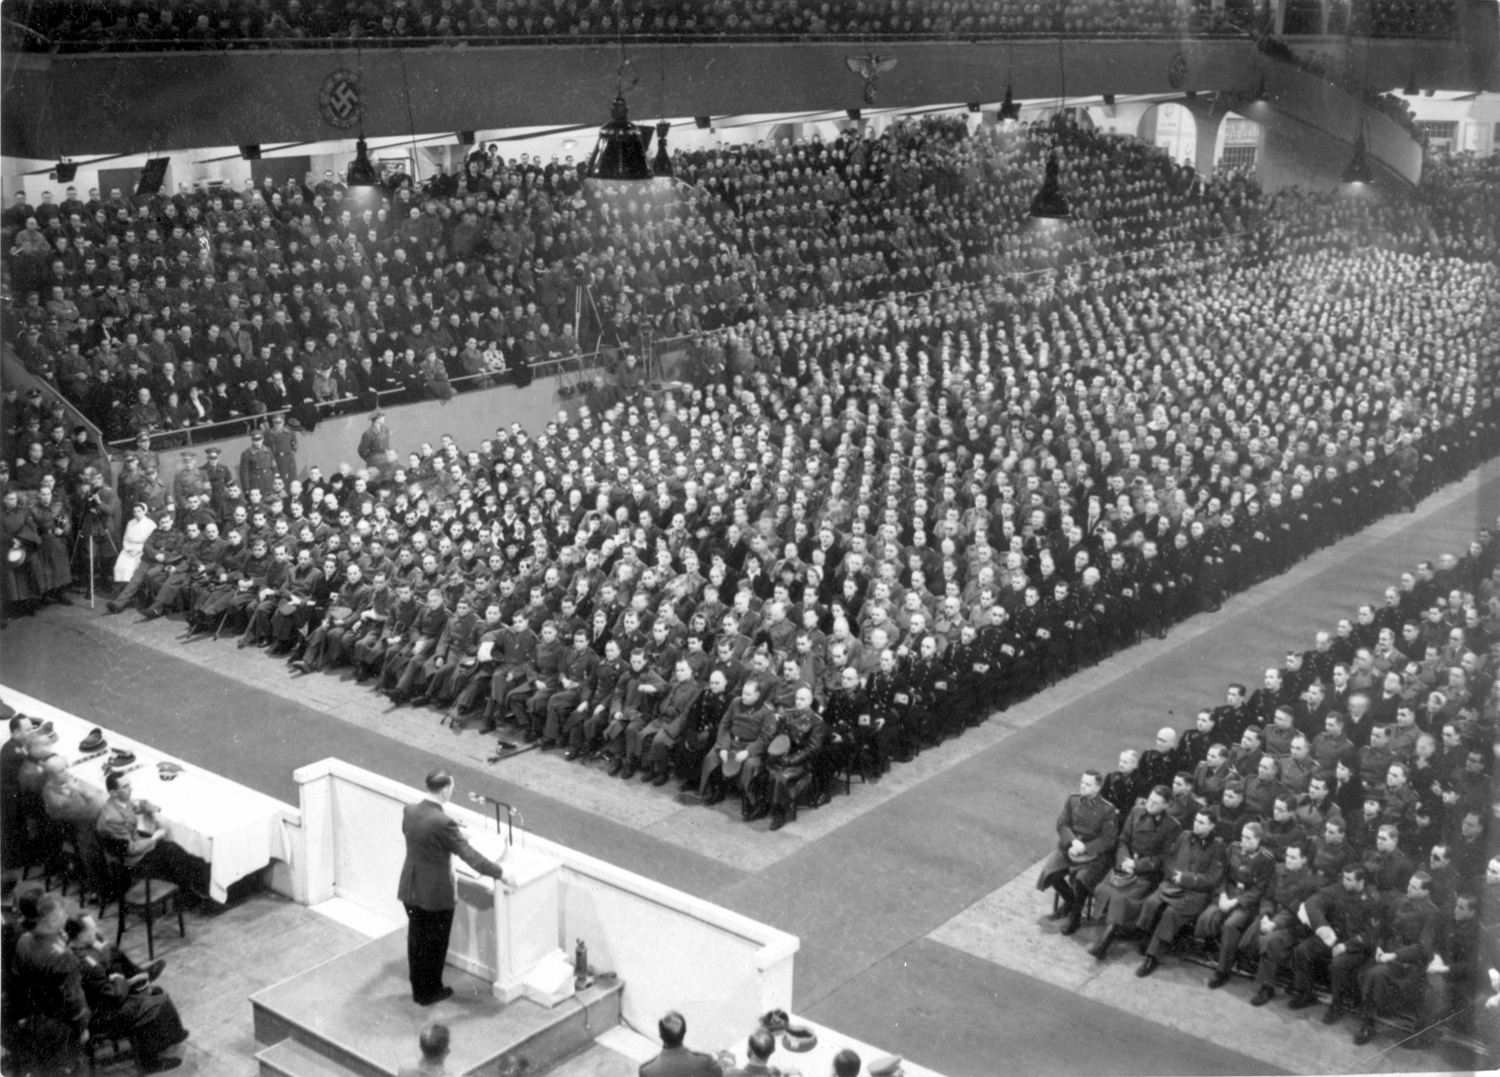 Adolf Hitler gives a speech in Berlin's Sportspalast in front of officers, from Eva Braun's albums